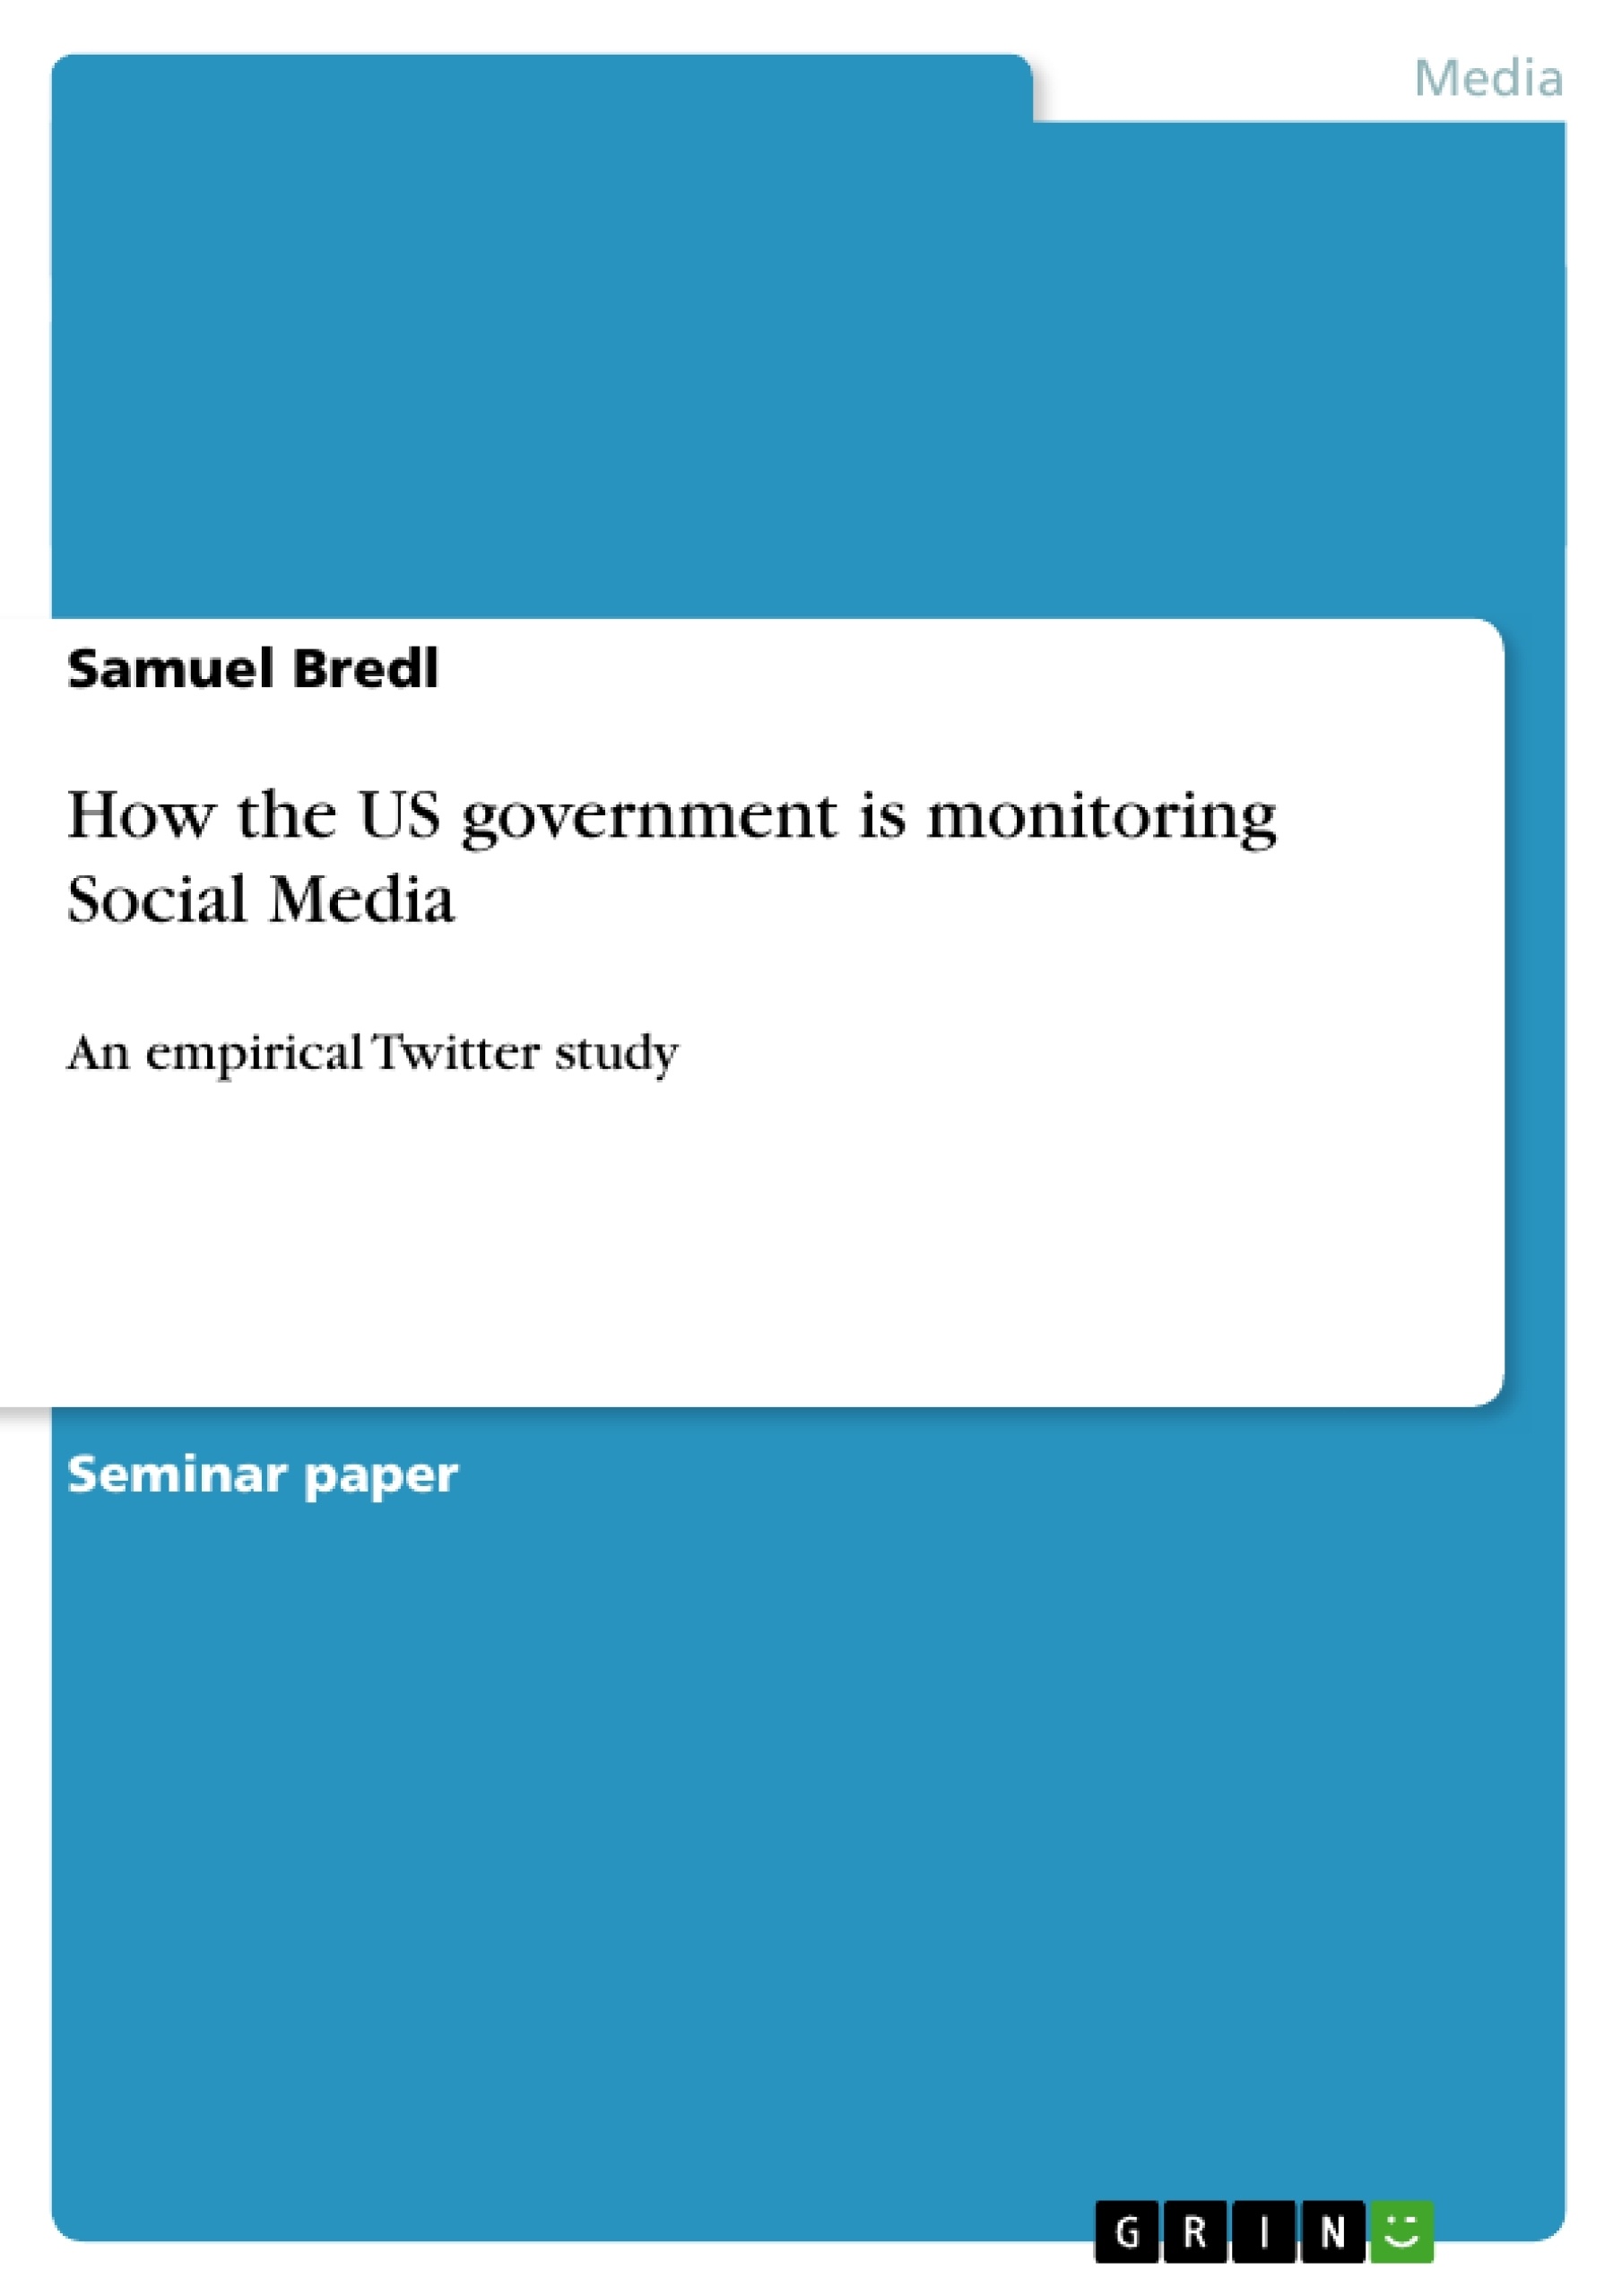 Title: How the US government is monitoring Social Media